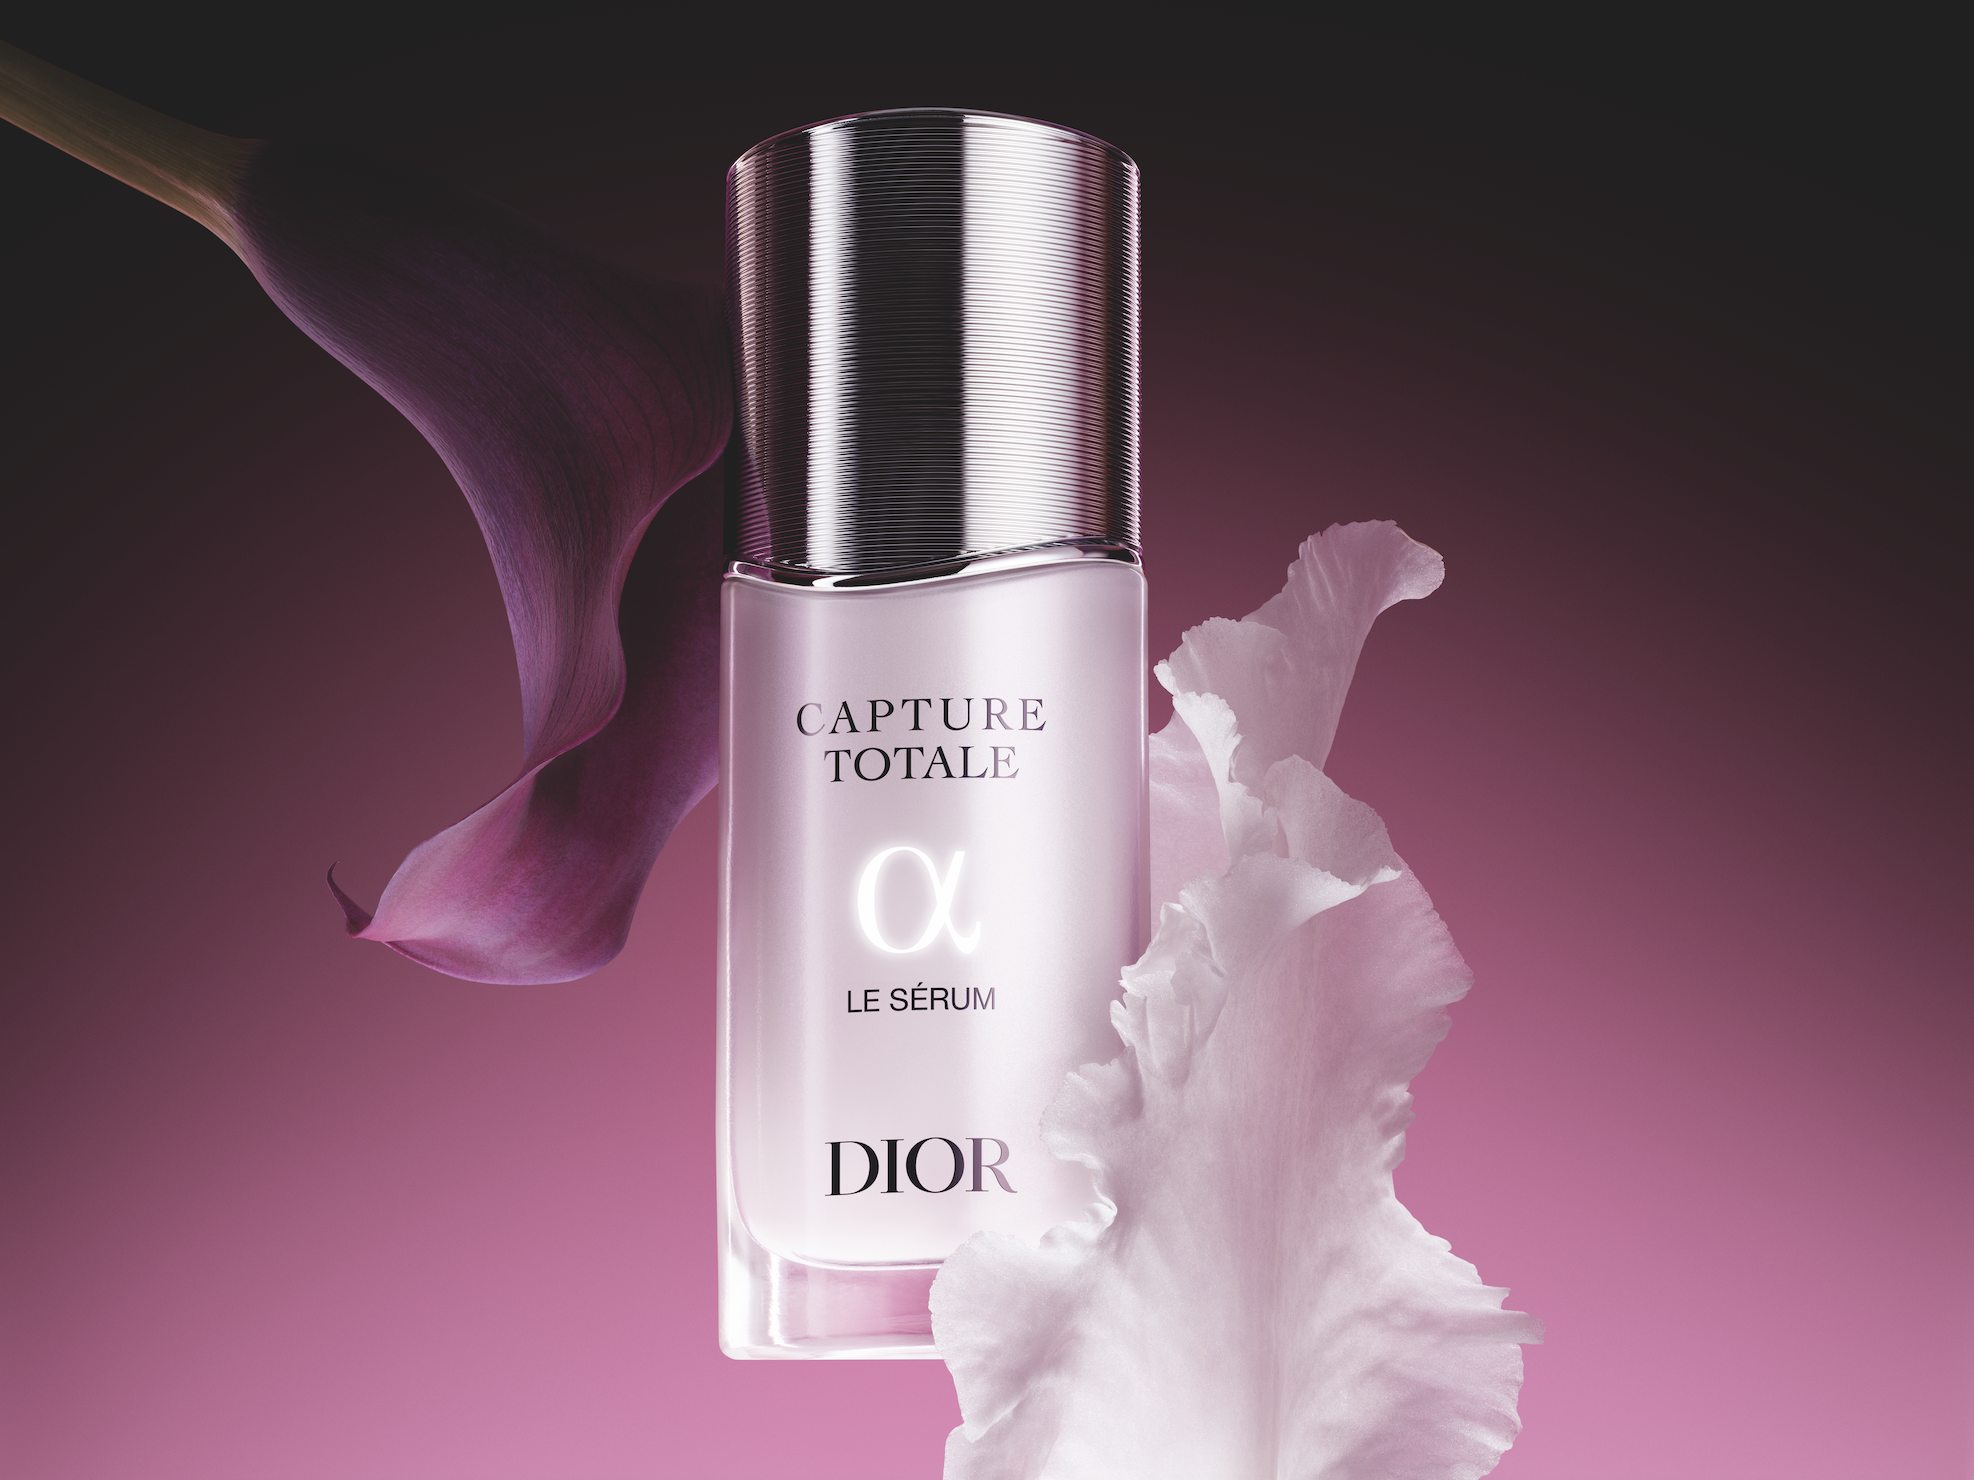 TEST Serum  Kem Dưỡng Chống Lão Hoá Trong 2 Tuần  Dior Capture Totale  Brief Review  PrettyMuch  YouTube